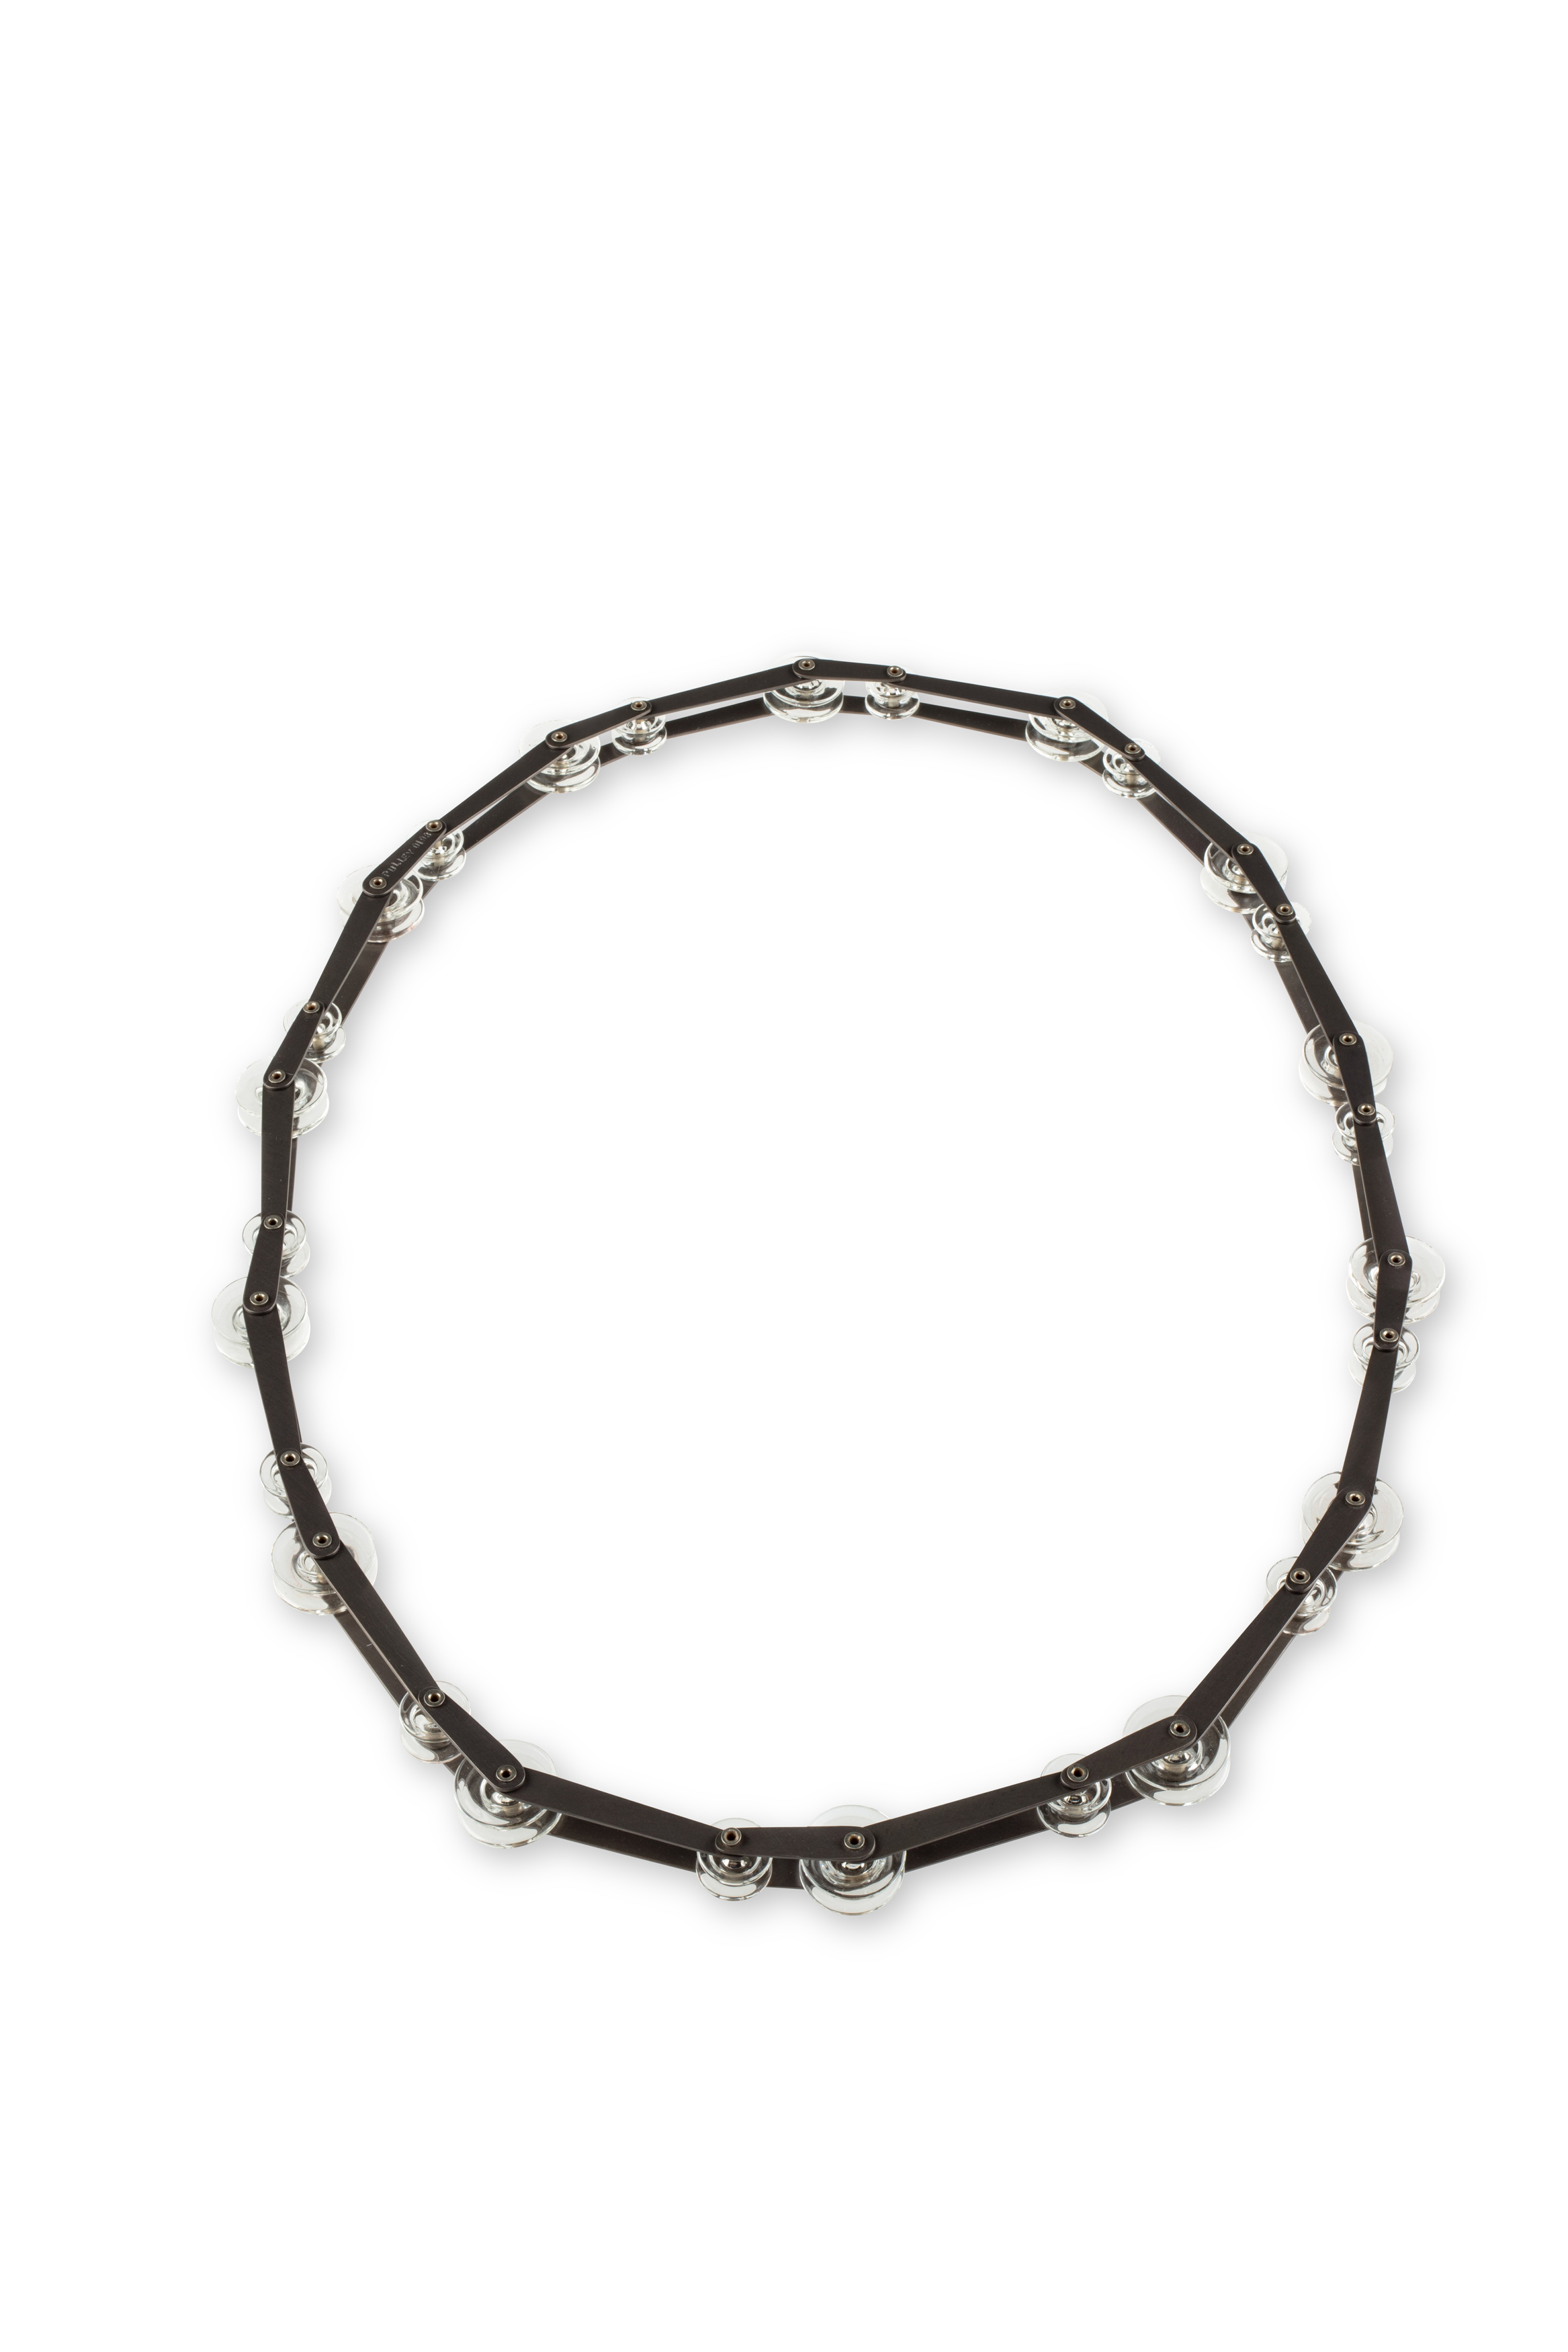 'Pulley' necklace by Blanche Tilden